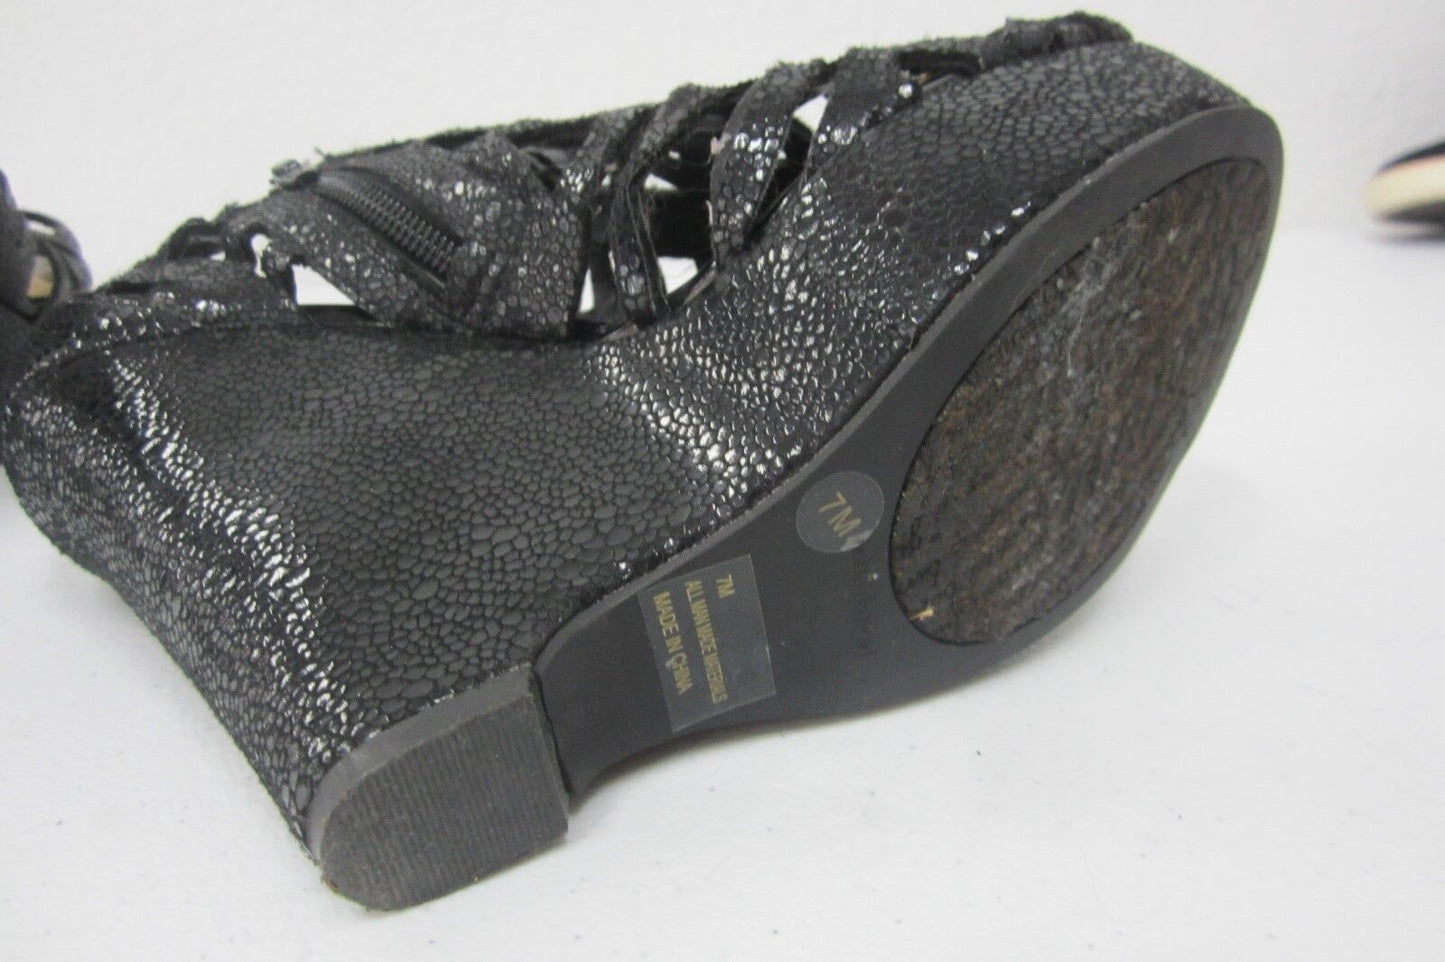 *NEW*  Gianni Bini Zip Up Black Leather Faux Snakeskin Wedge Open Toe Shoes 7M